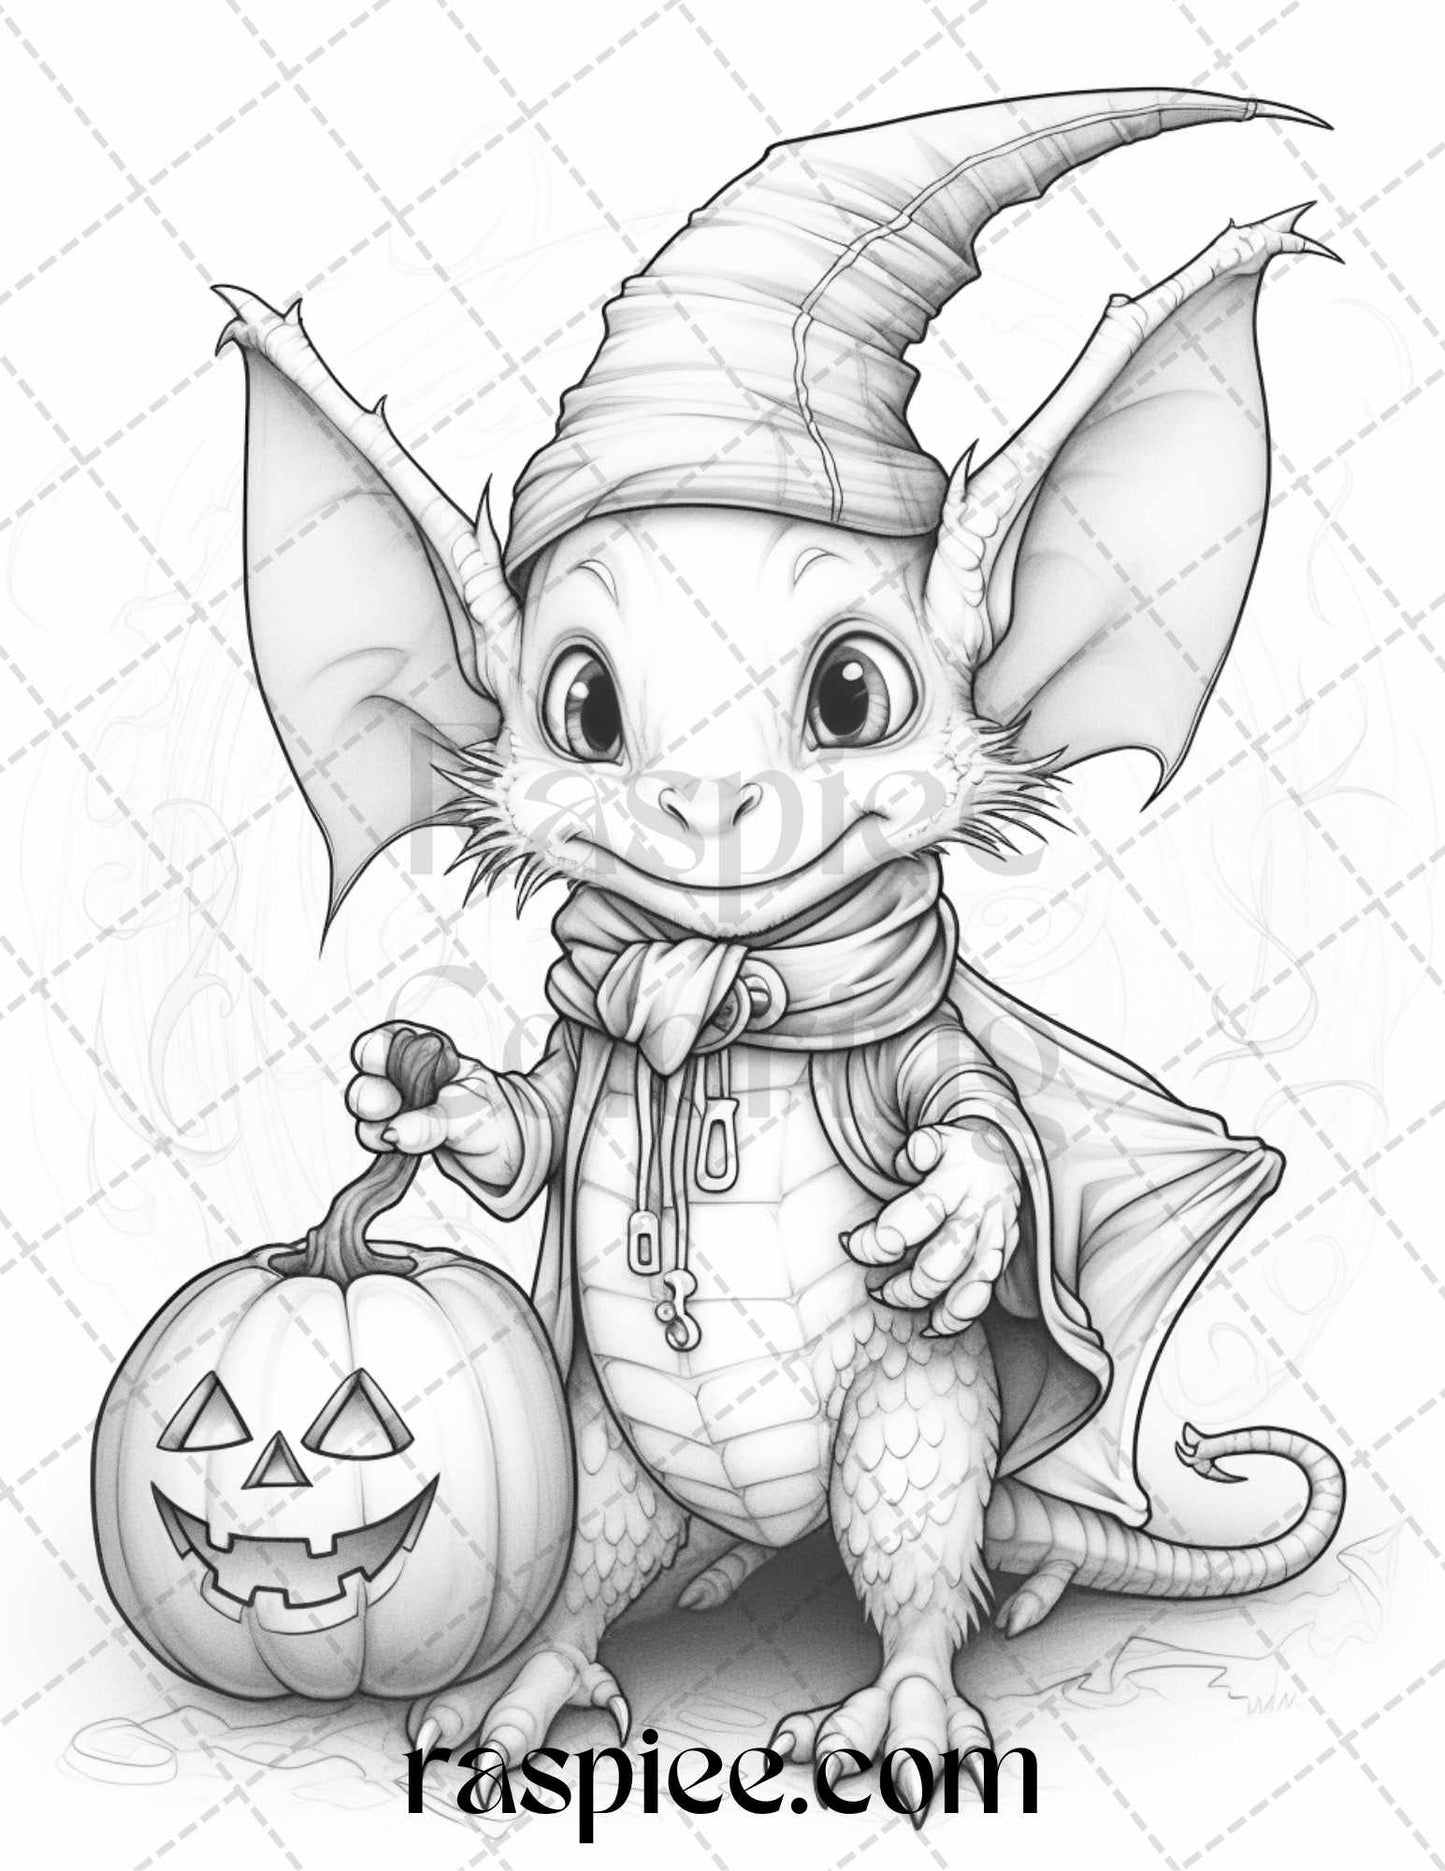 Cute Pumpkin Dragons Grayscale Coloring Pages for Adults and Kids, halloween coloring pages for kids, pumpkin halloween coloring pages, halloween coloring pages for adults